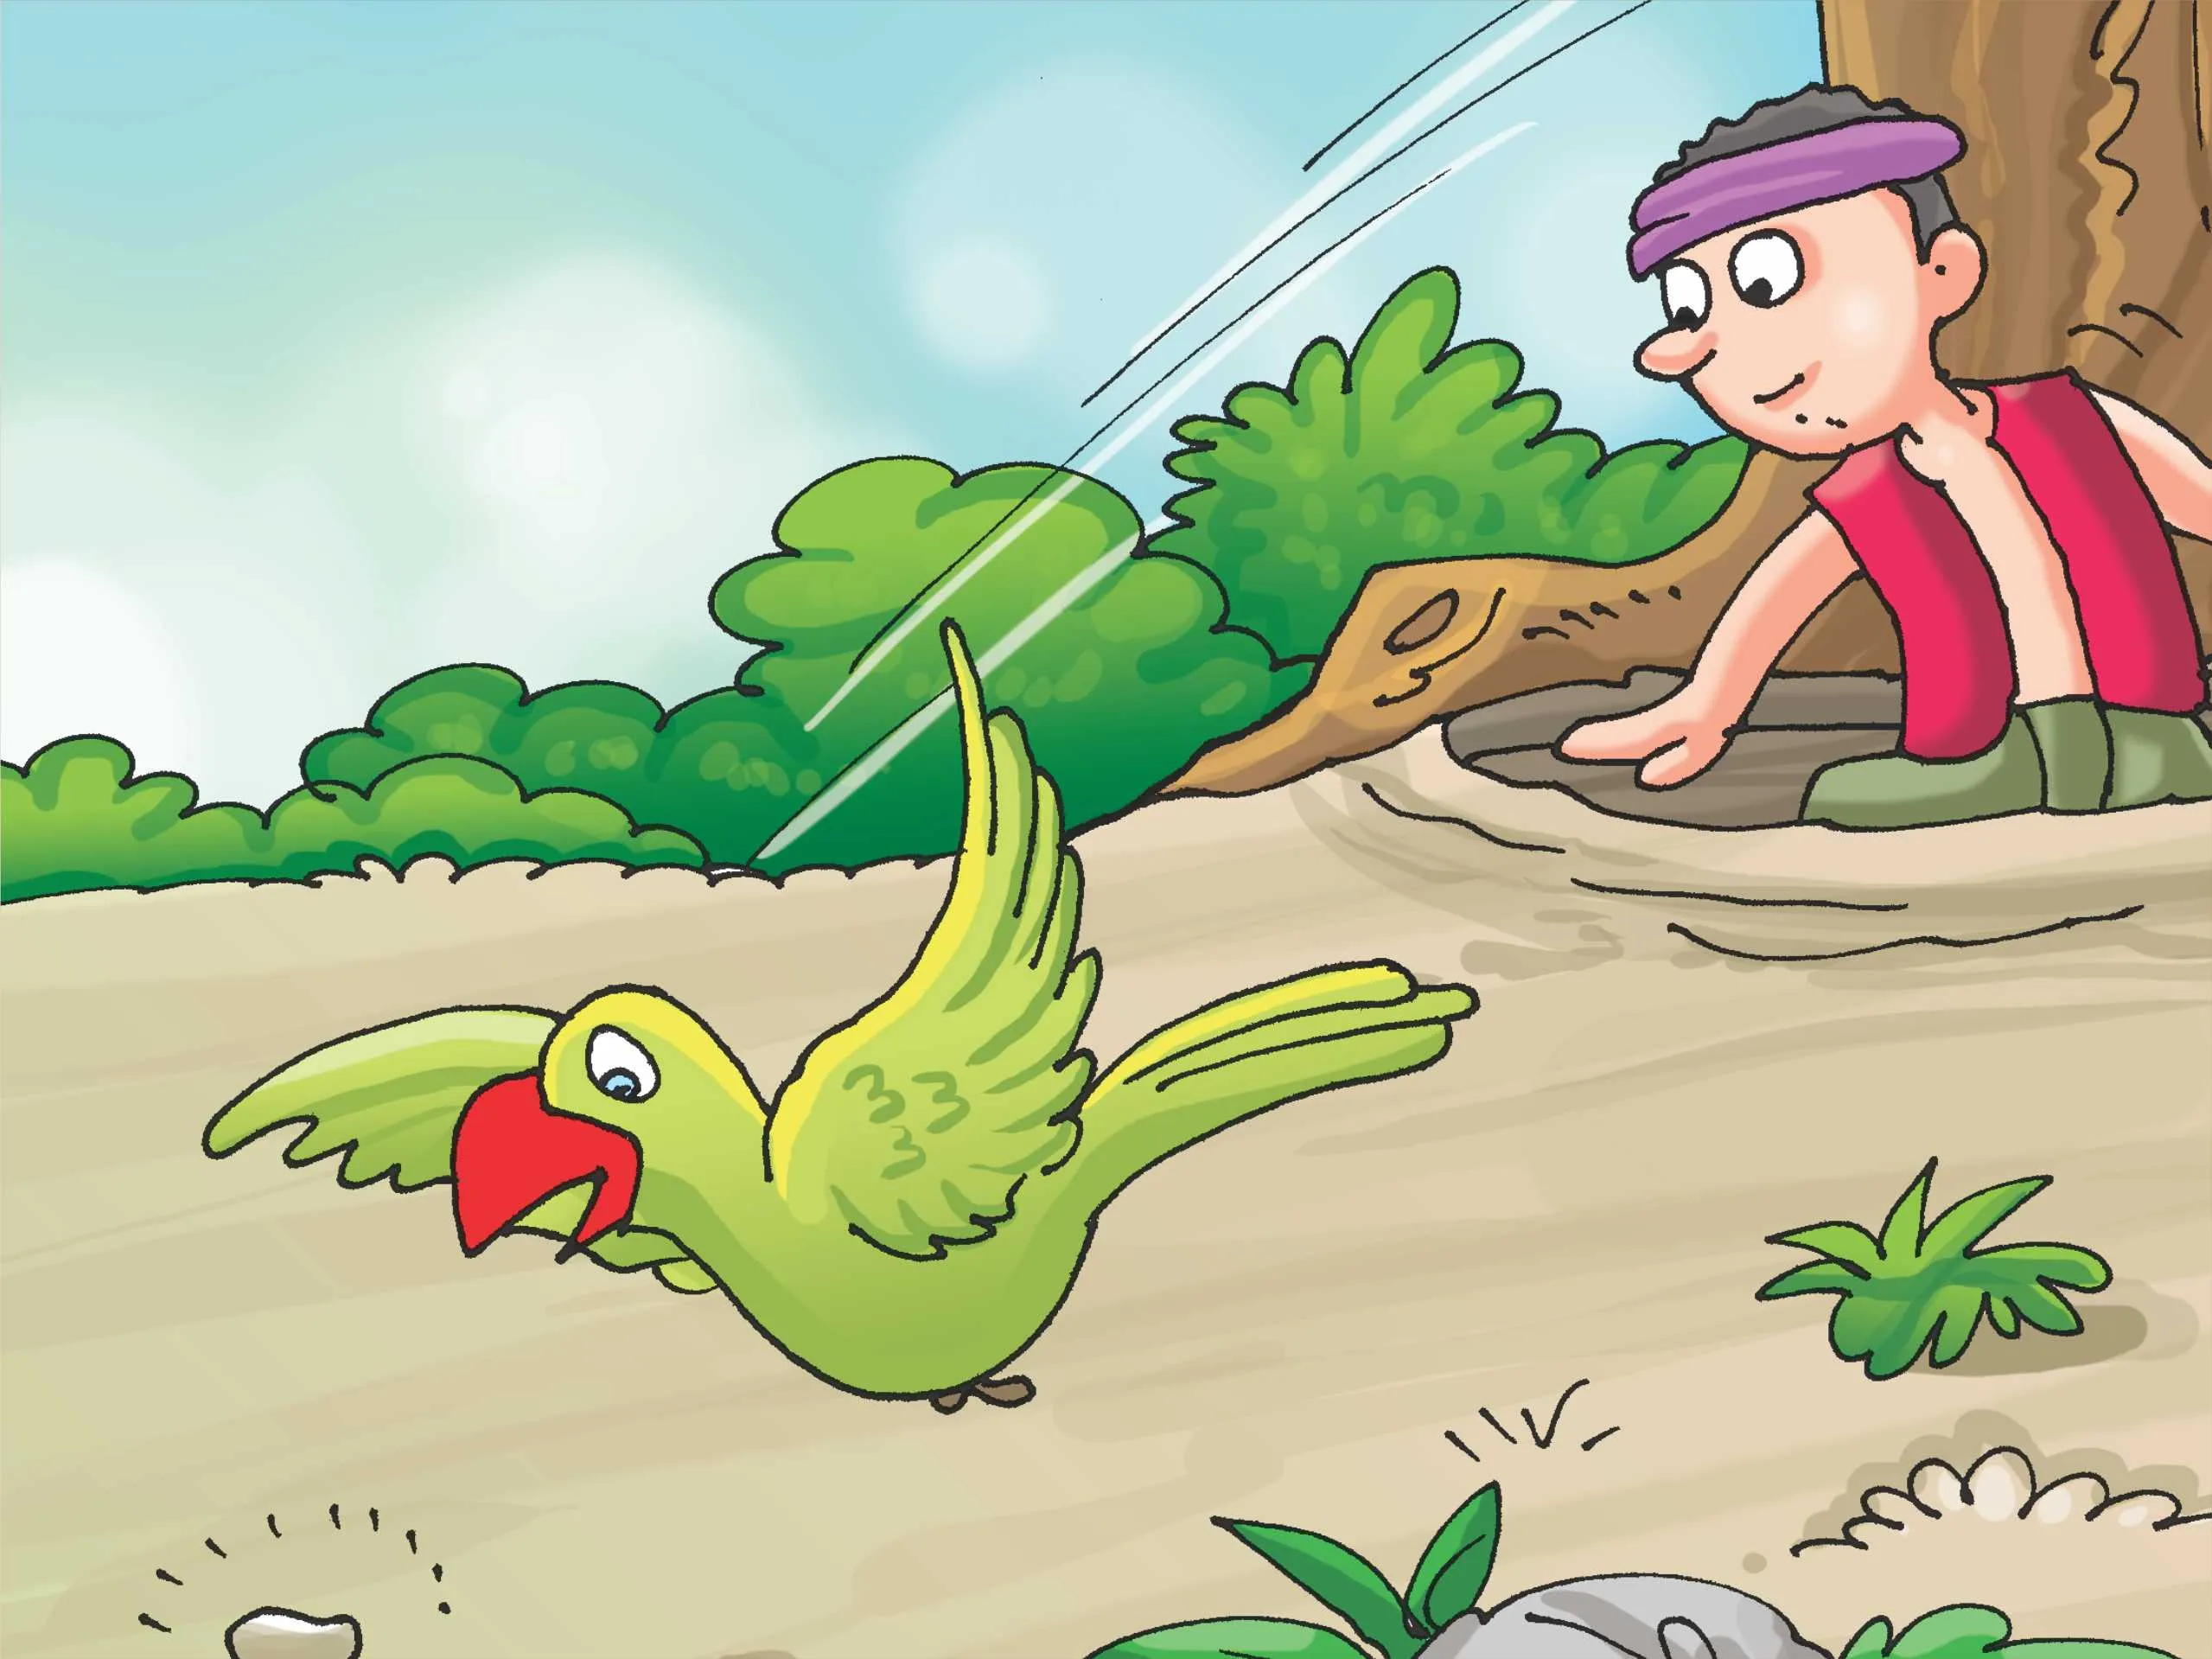 Parrot flying Away from man cartoon image